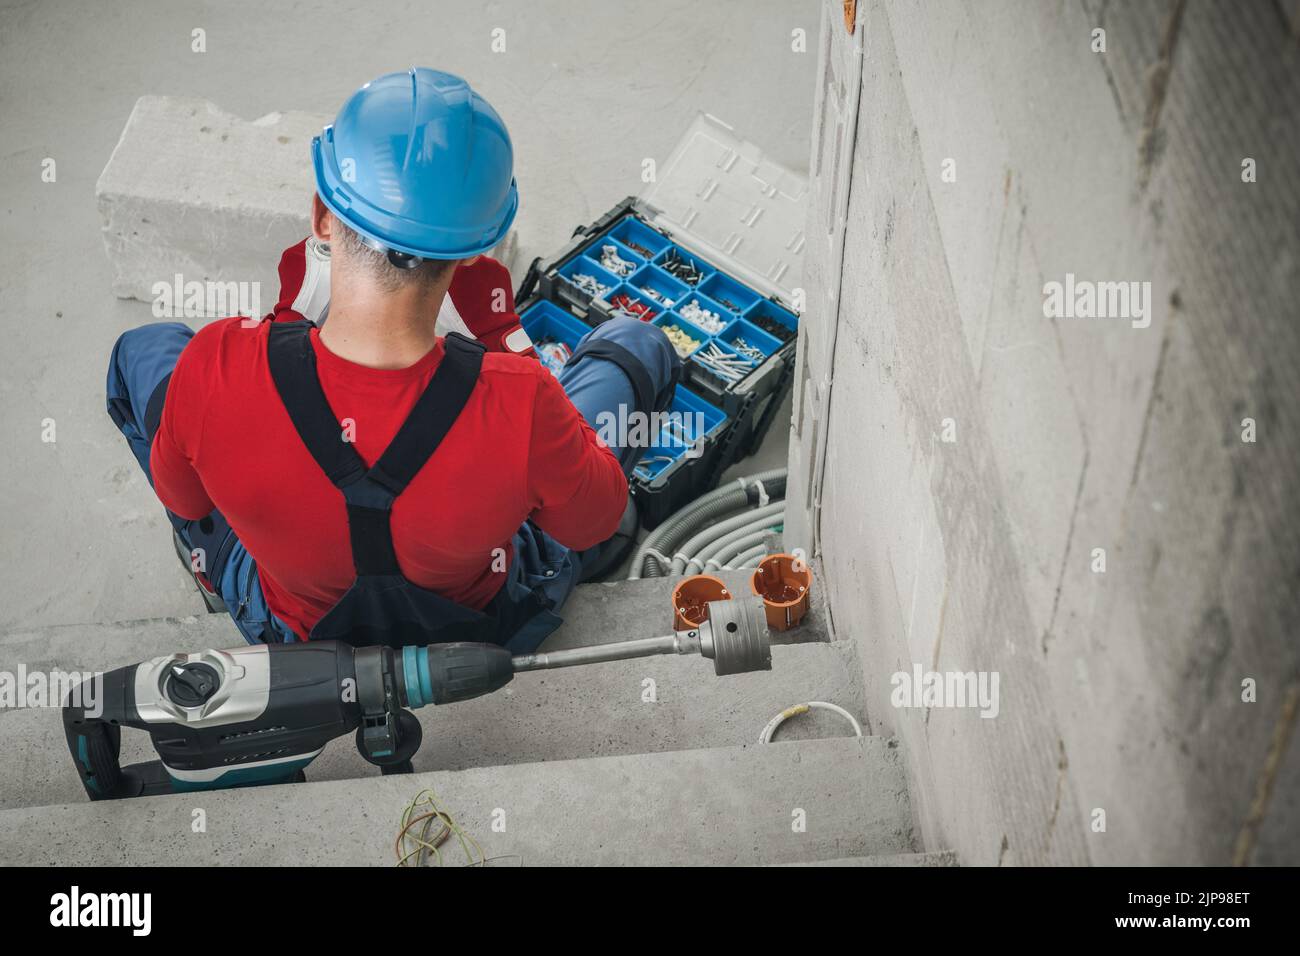 Caucasian Construction Worker Sitting in Front of His Opened Toolbox Preparing to Start Work. Power Drill with Hole Saw Bit Lying Alongside Him. Rear Stock Photo